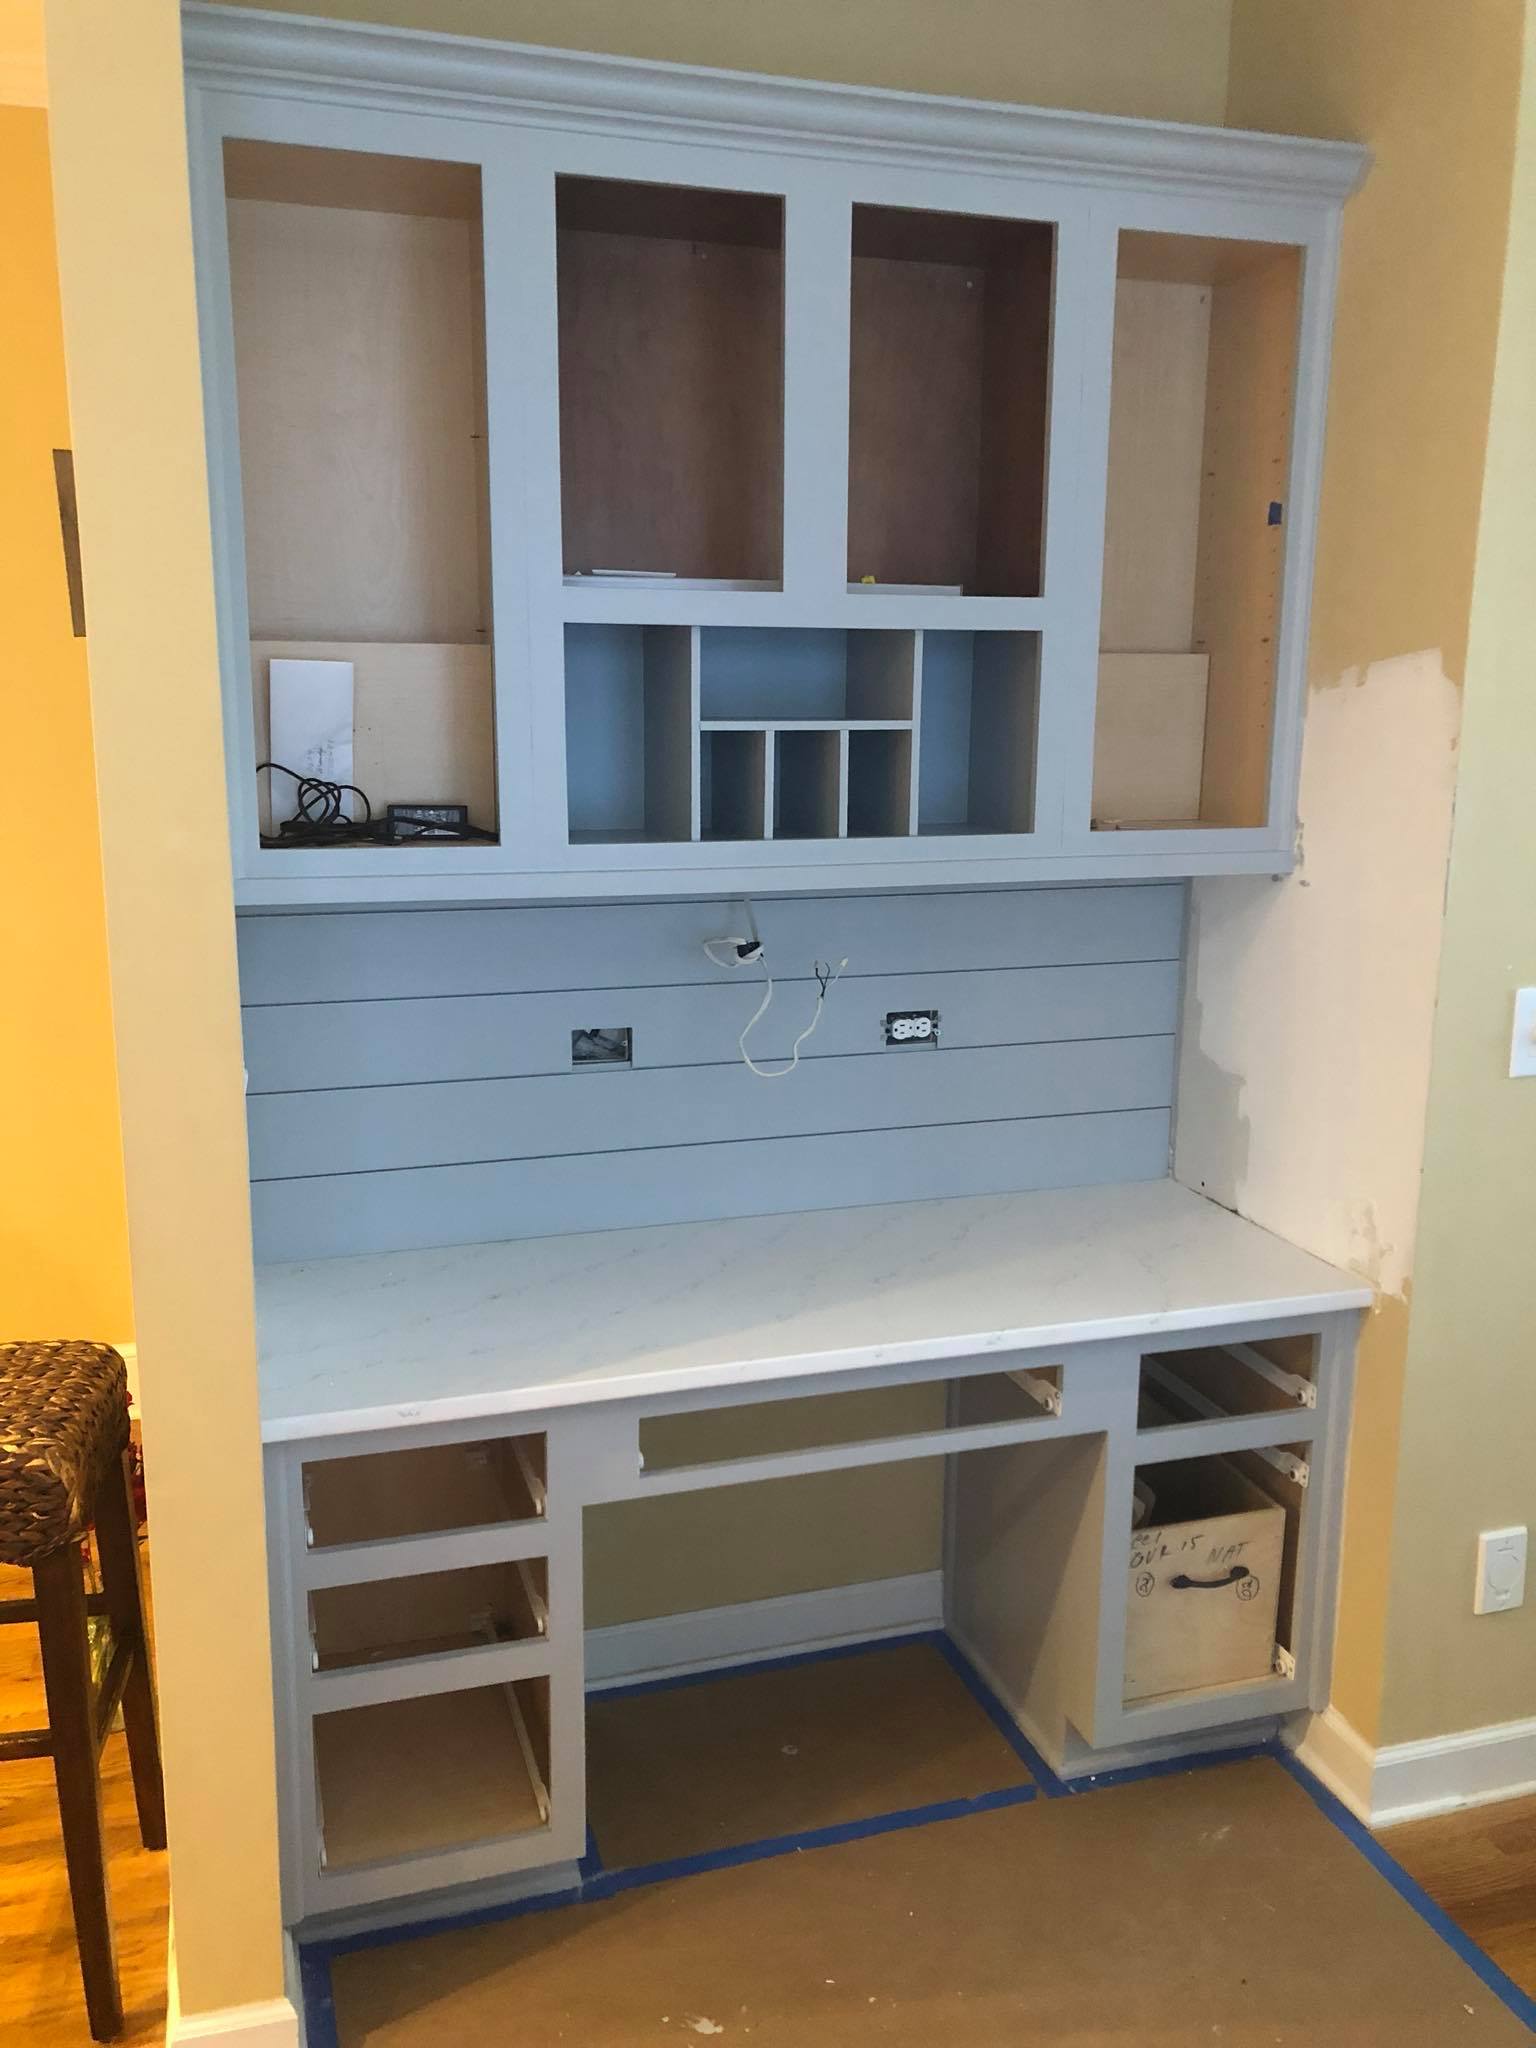 Office Desk and Wall Mounted Cabinets with Slots Painted